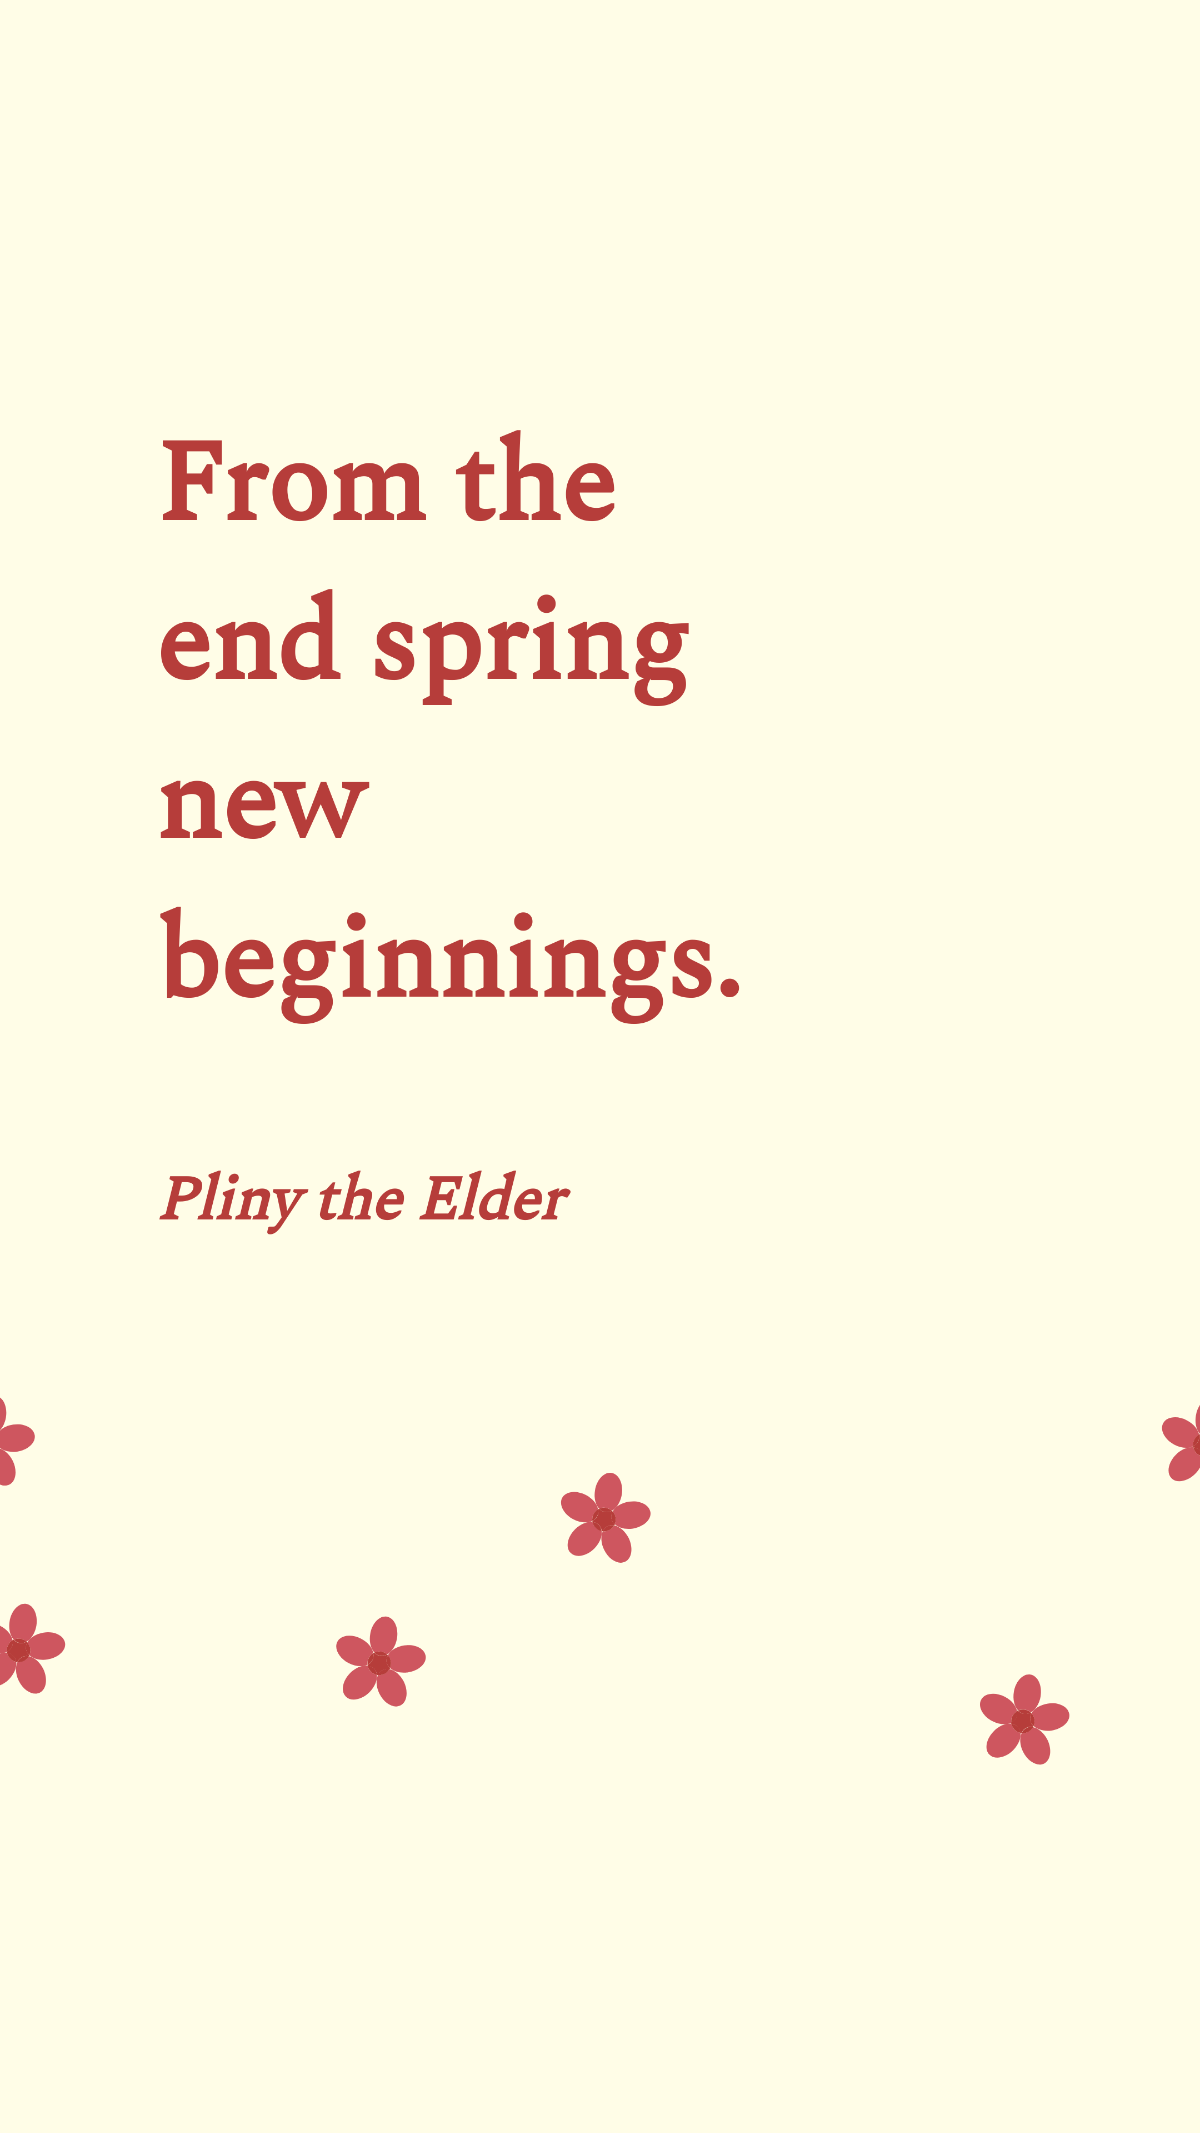 Free Pliny the Elder - From the end spring new beginnings. Template